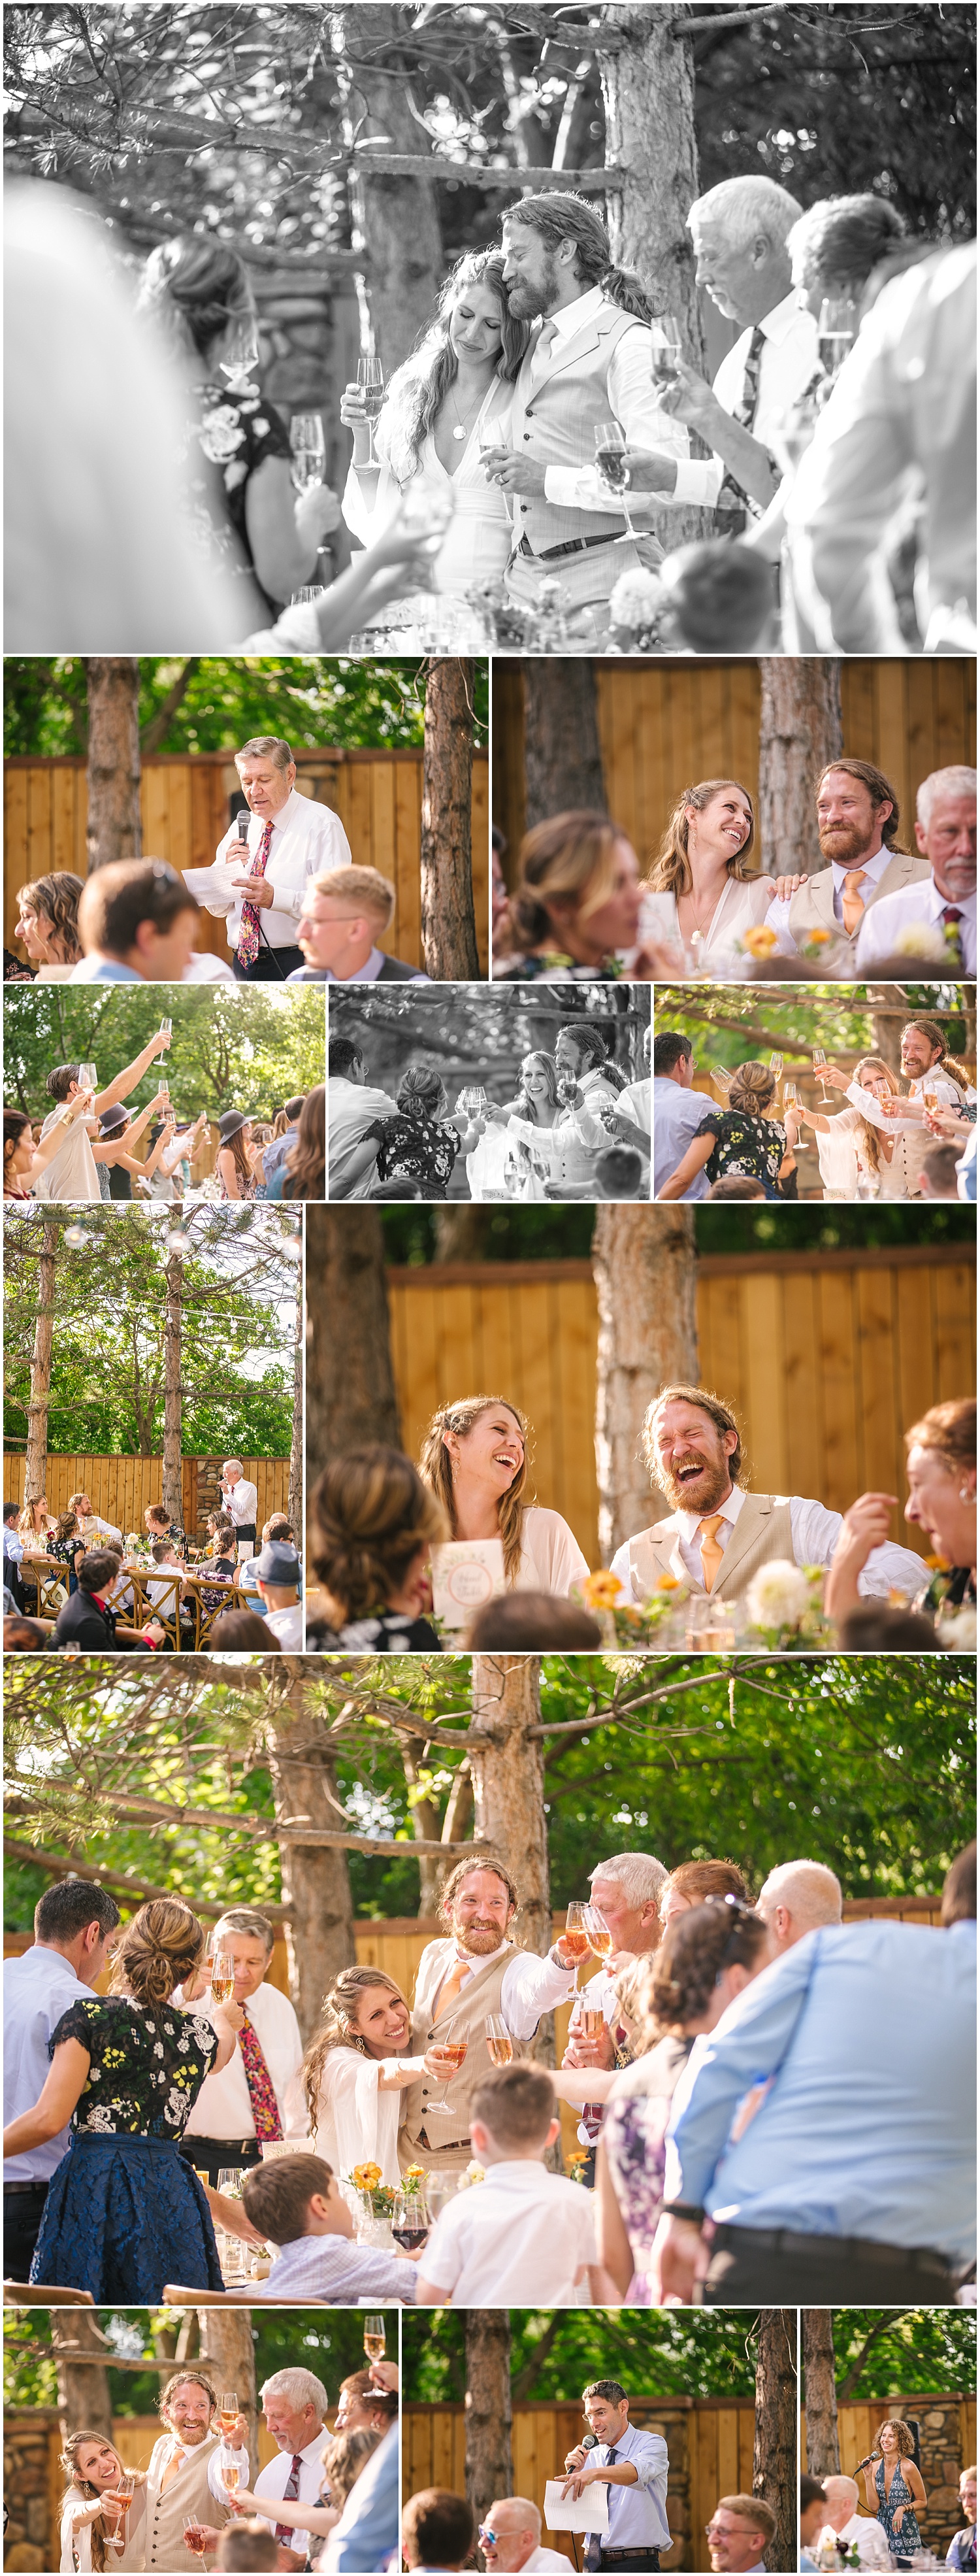 Toasts to the bride and groom at Lone Hawk Farm wedding reception